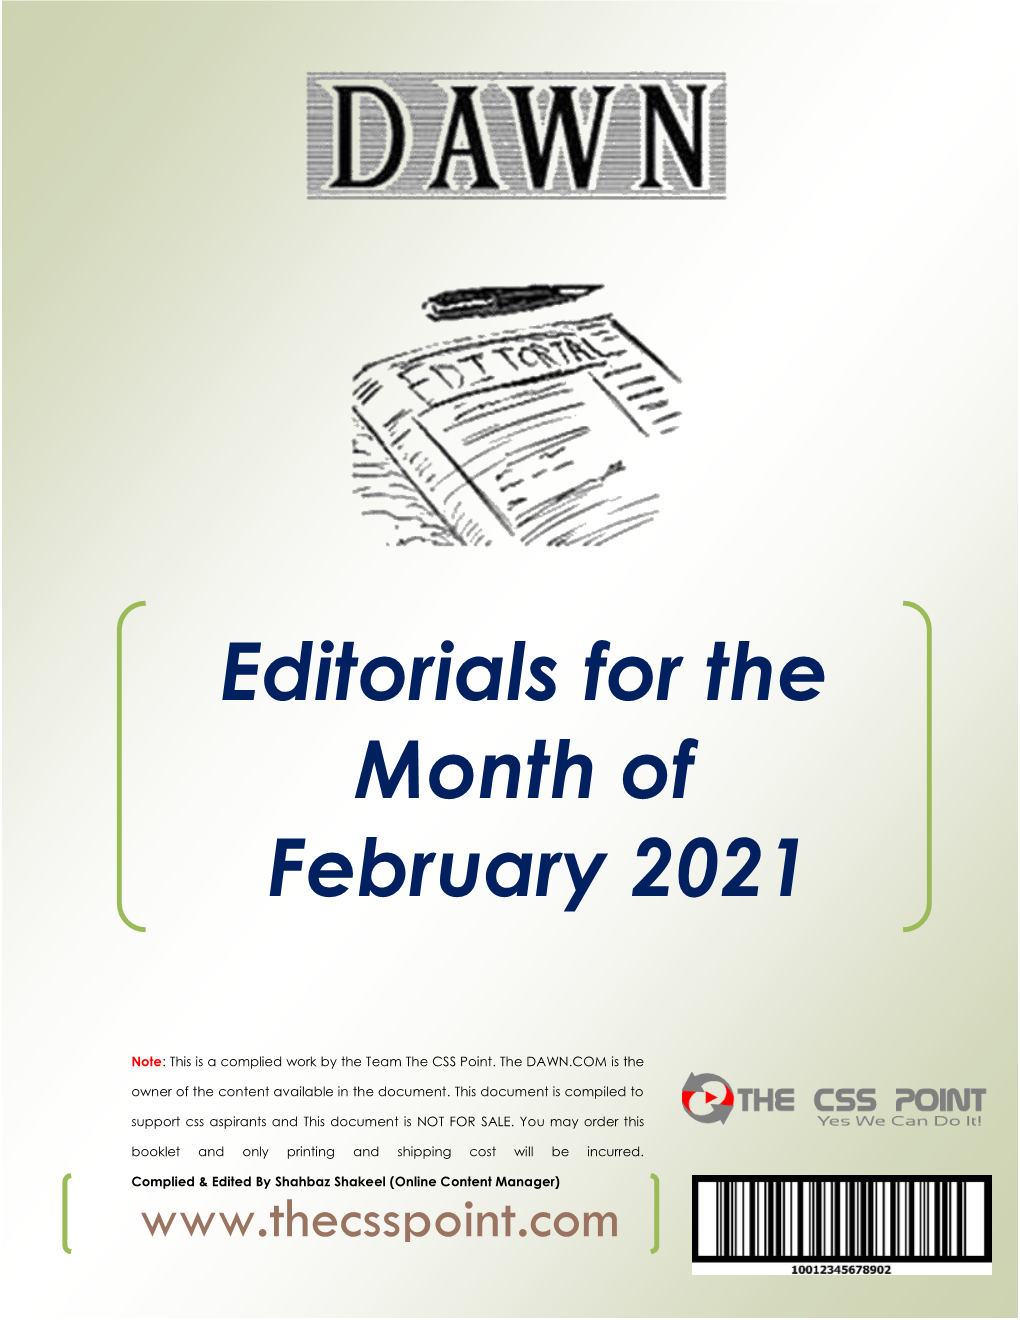 Editorials for the Month of February 2021